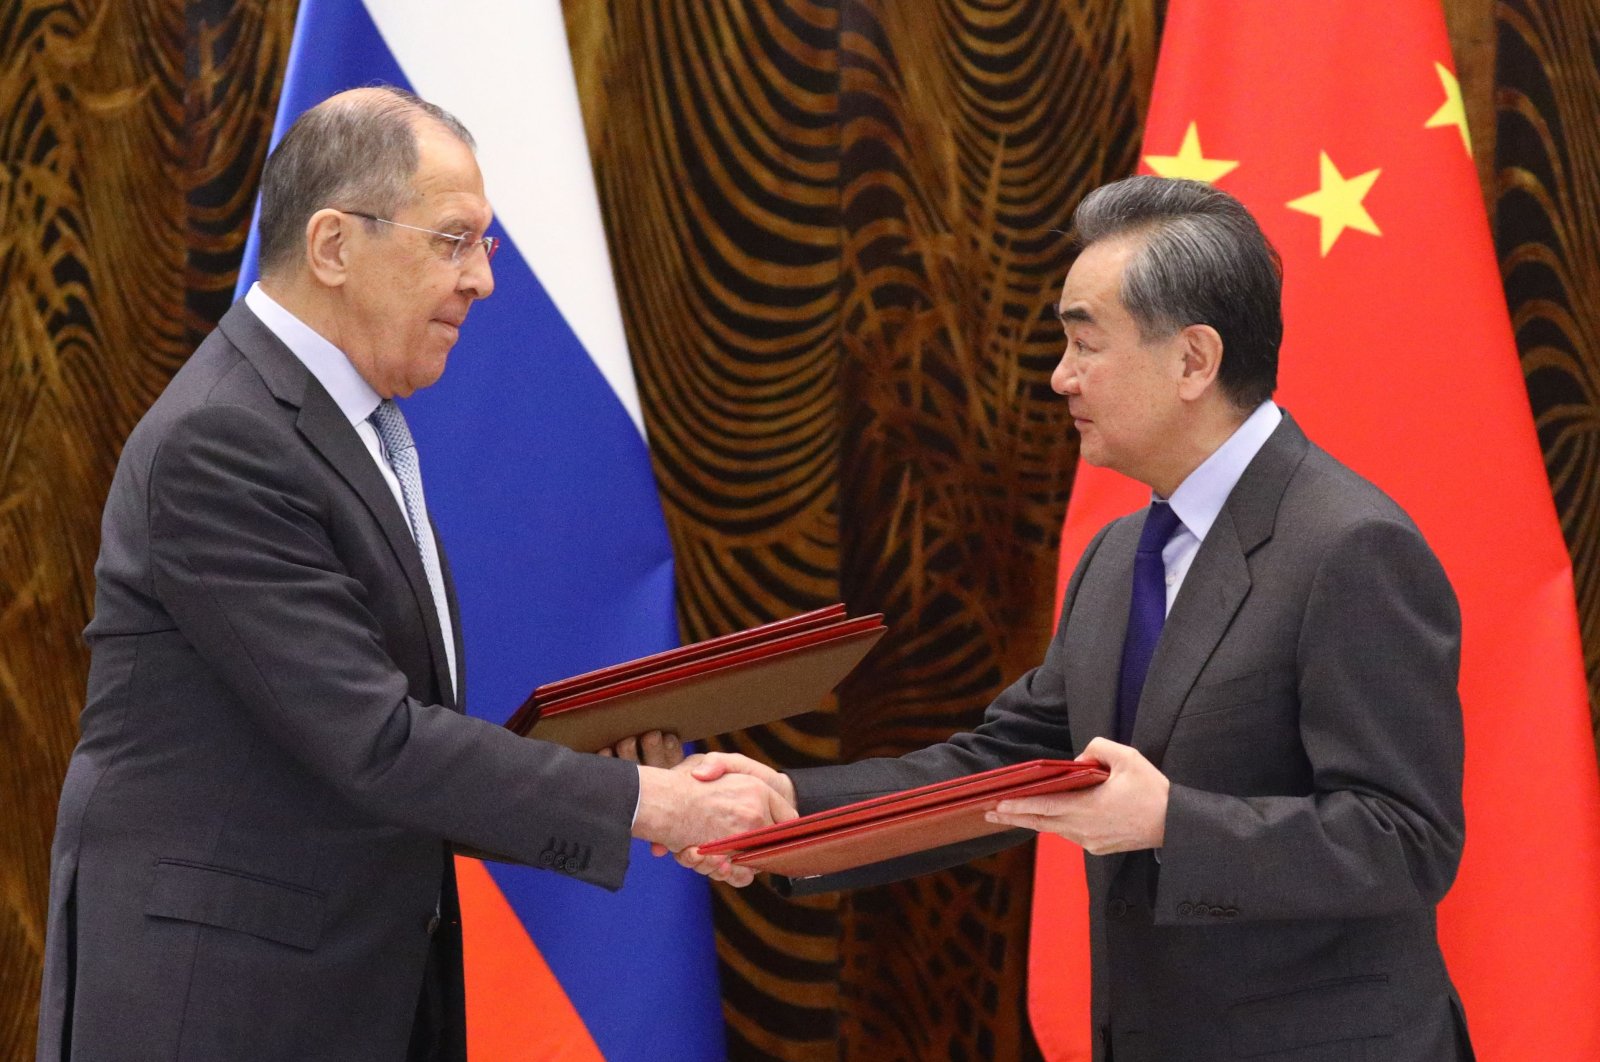 Russian Foreign Minister Sergei Lavrov (L) and Chinese Foreign Minister Wang Yi exchange documents during a signing ceremony following their talks in Guilin, China, March 23, 2021. (Russian Foreign Ministry via AFP)